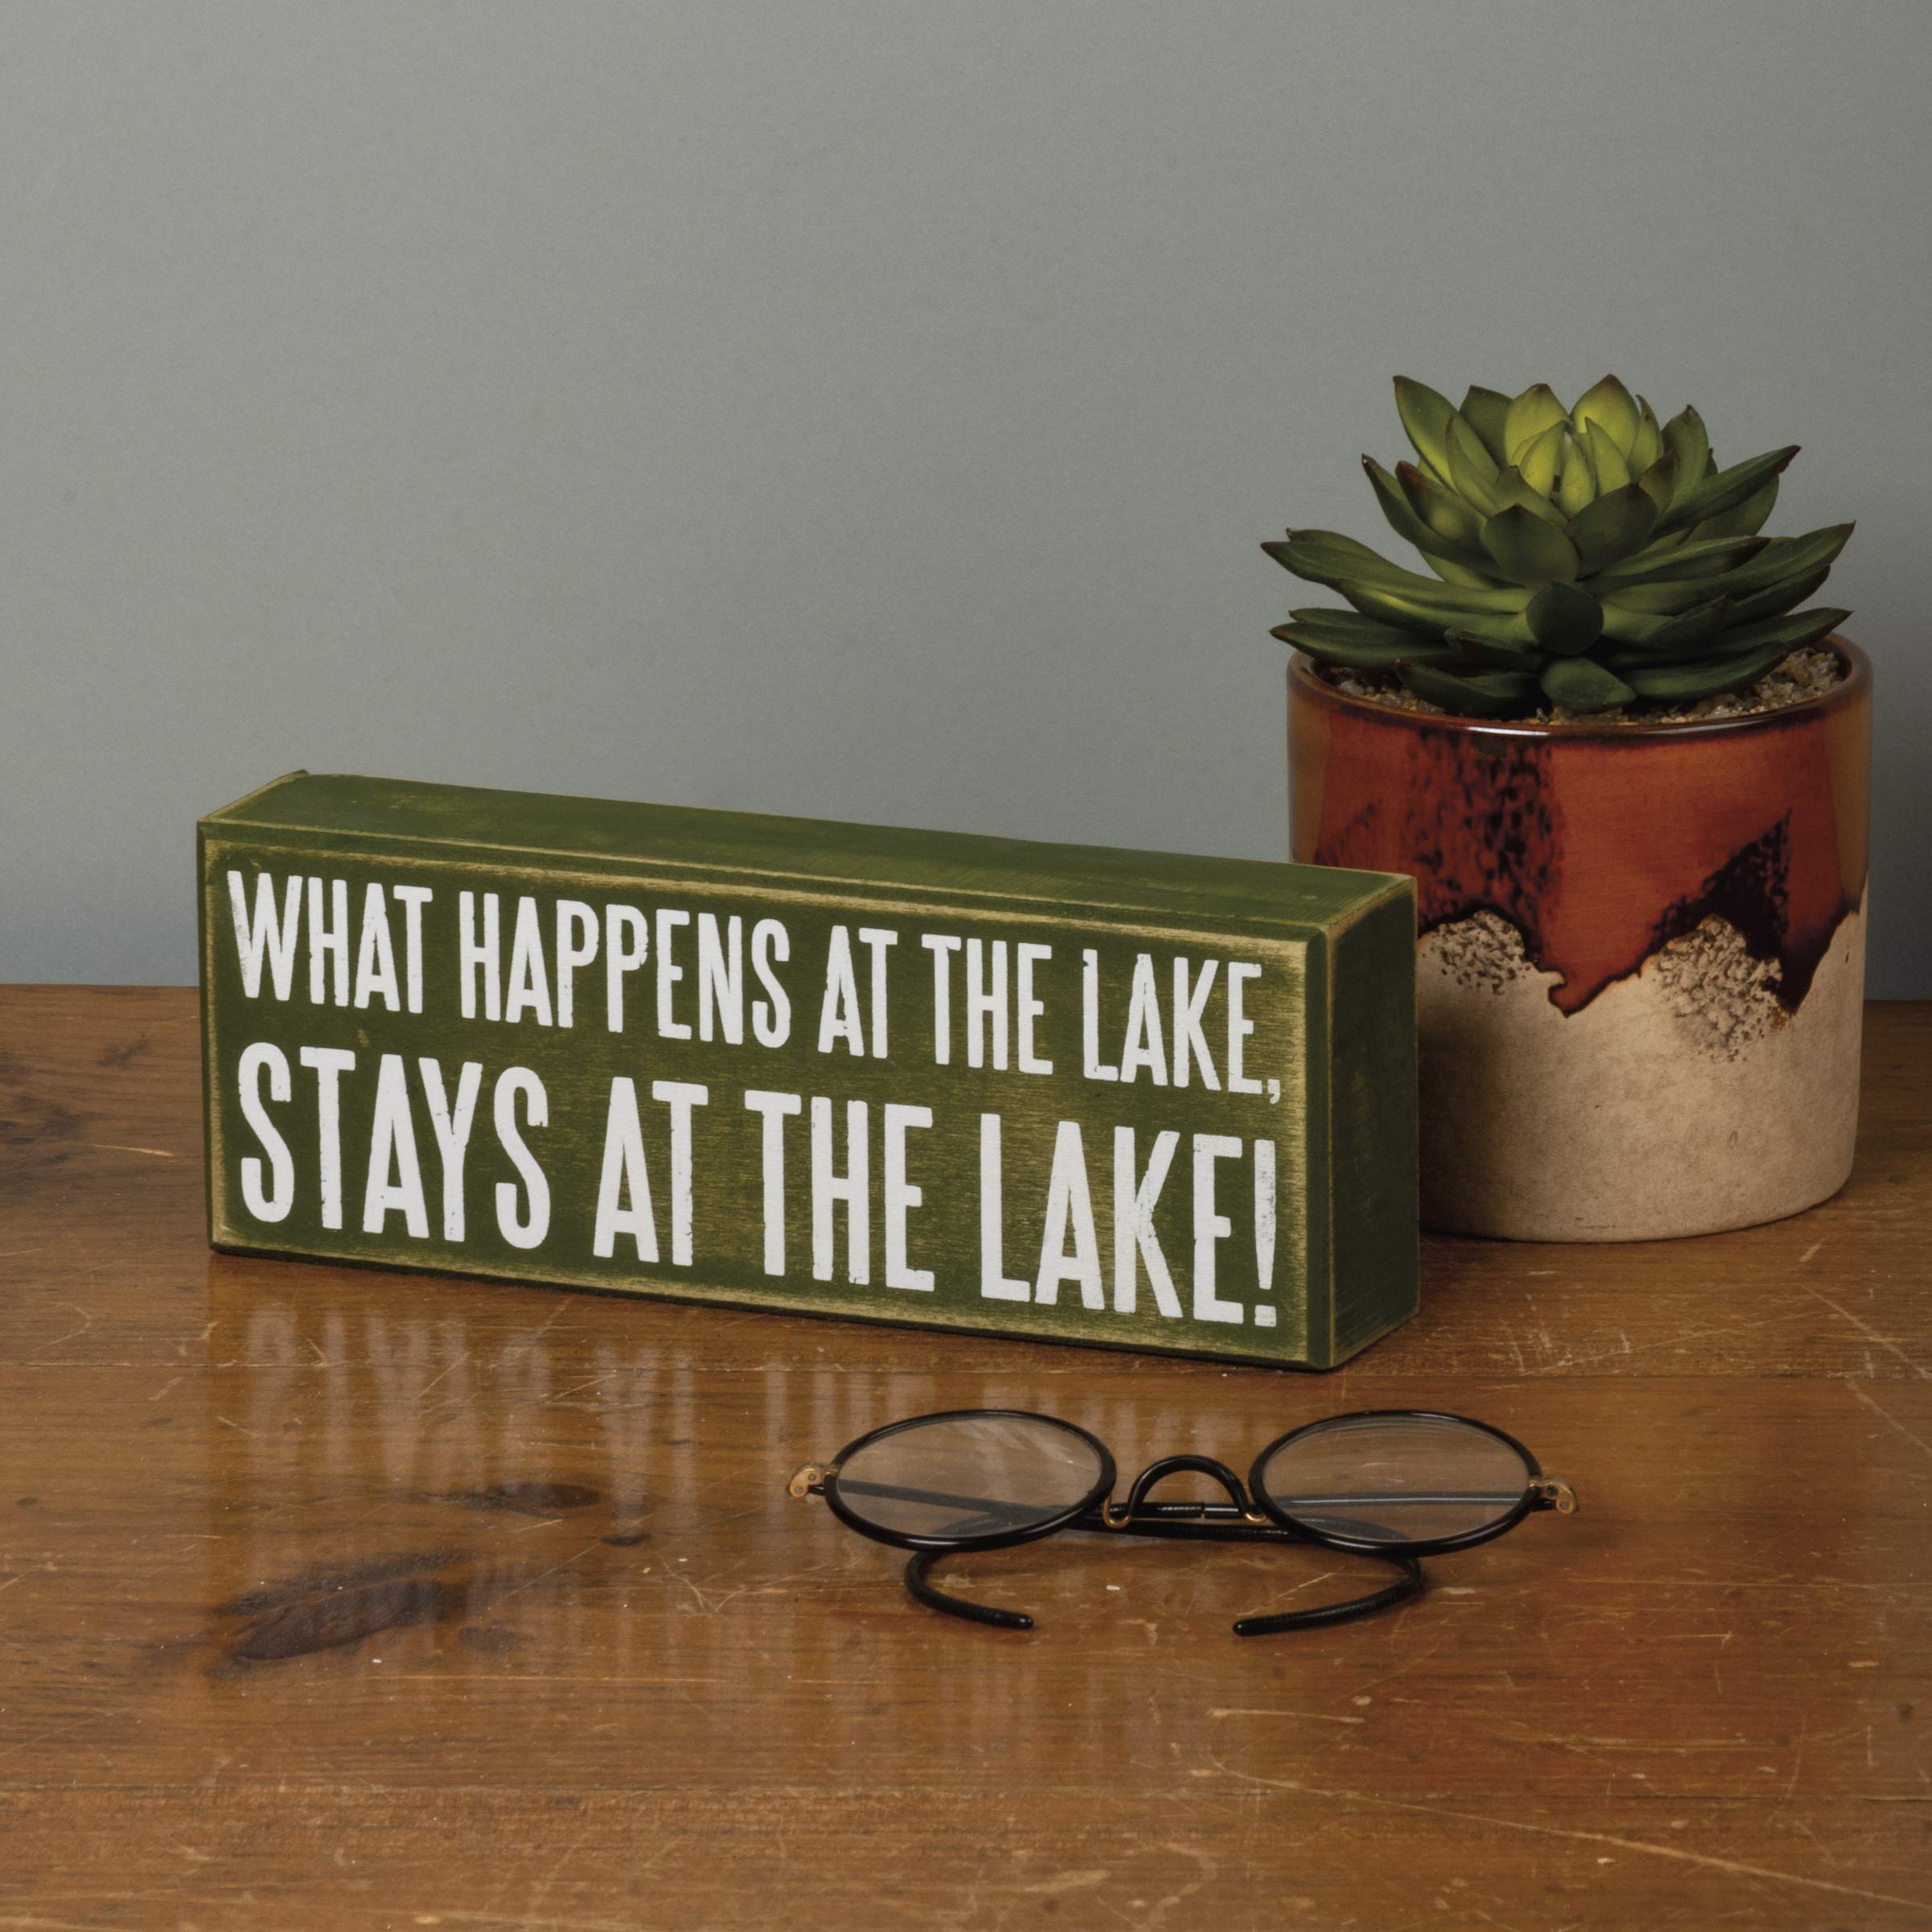 Primitives by Kathy 21113 Distressed Green Box Sign, 8 x 3-Inches, Stays at The Lake